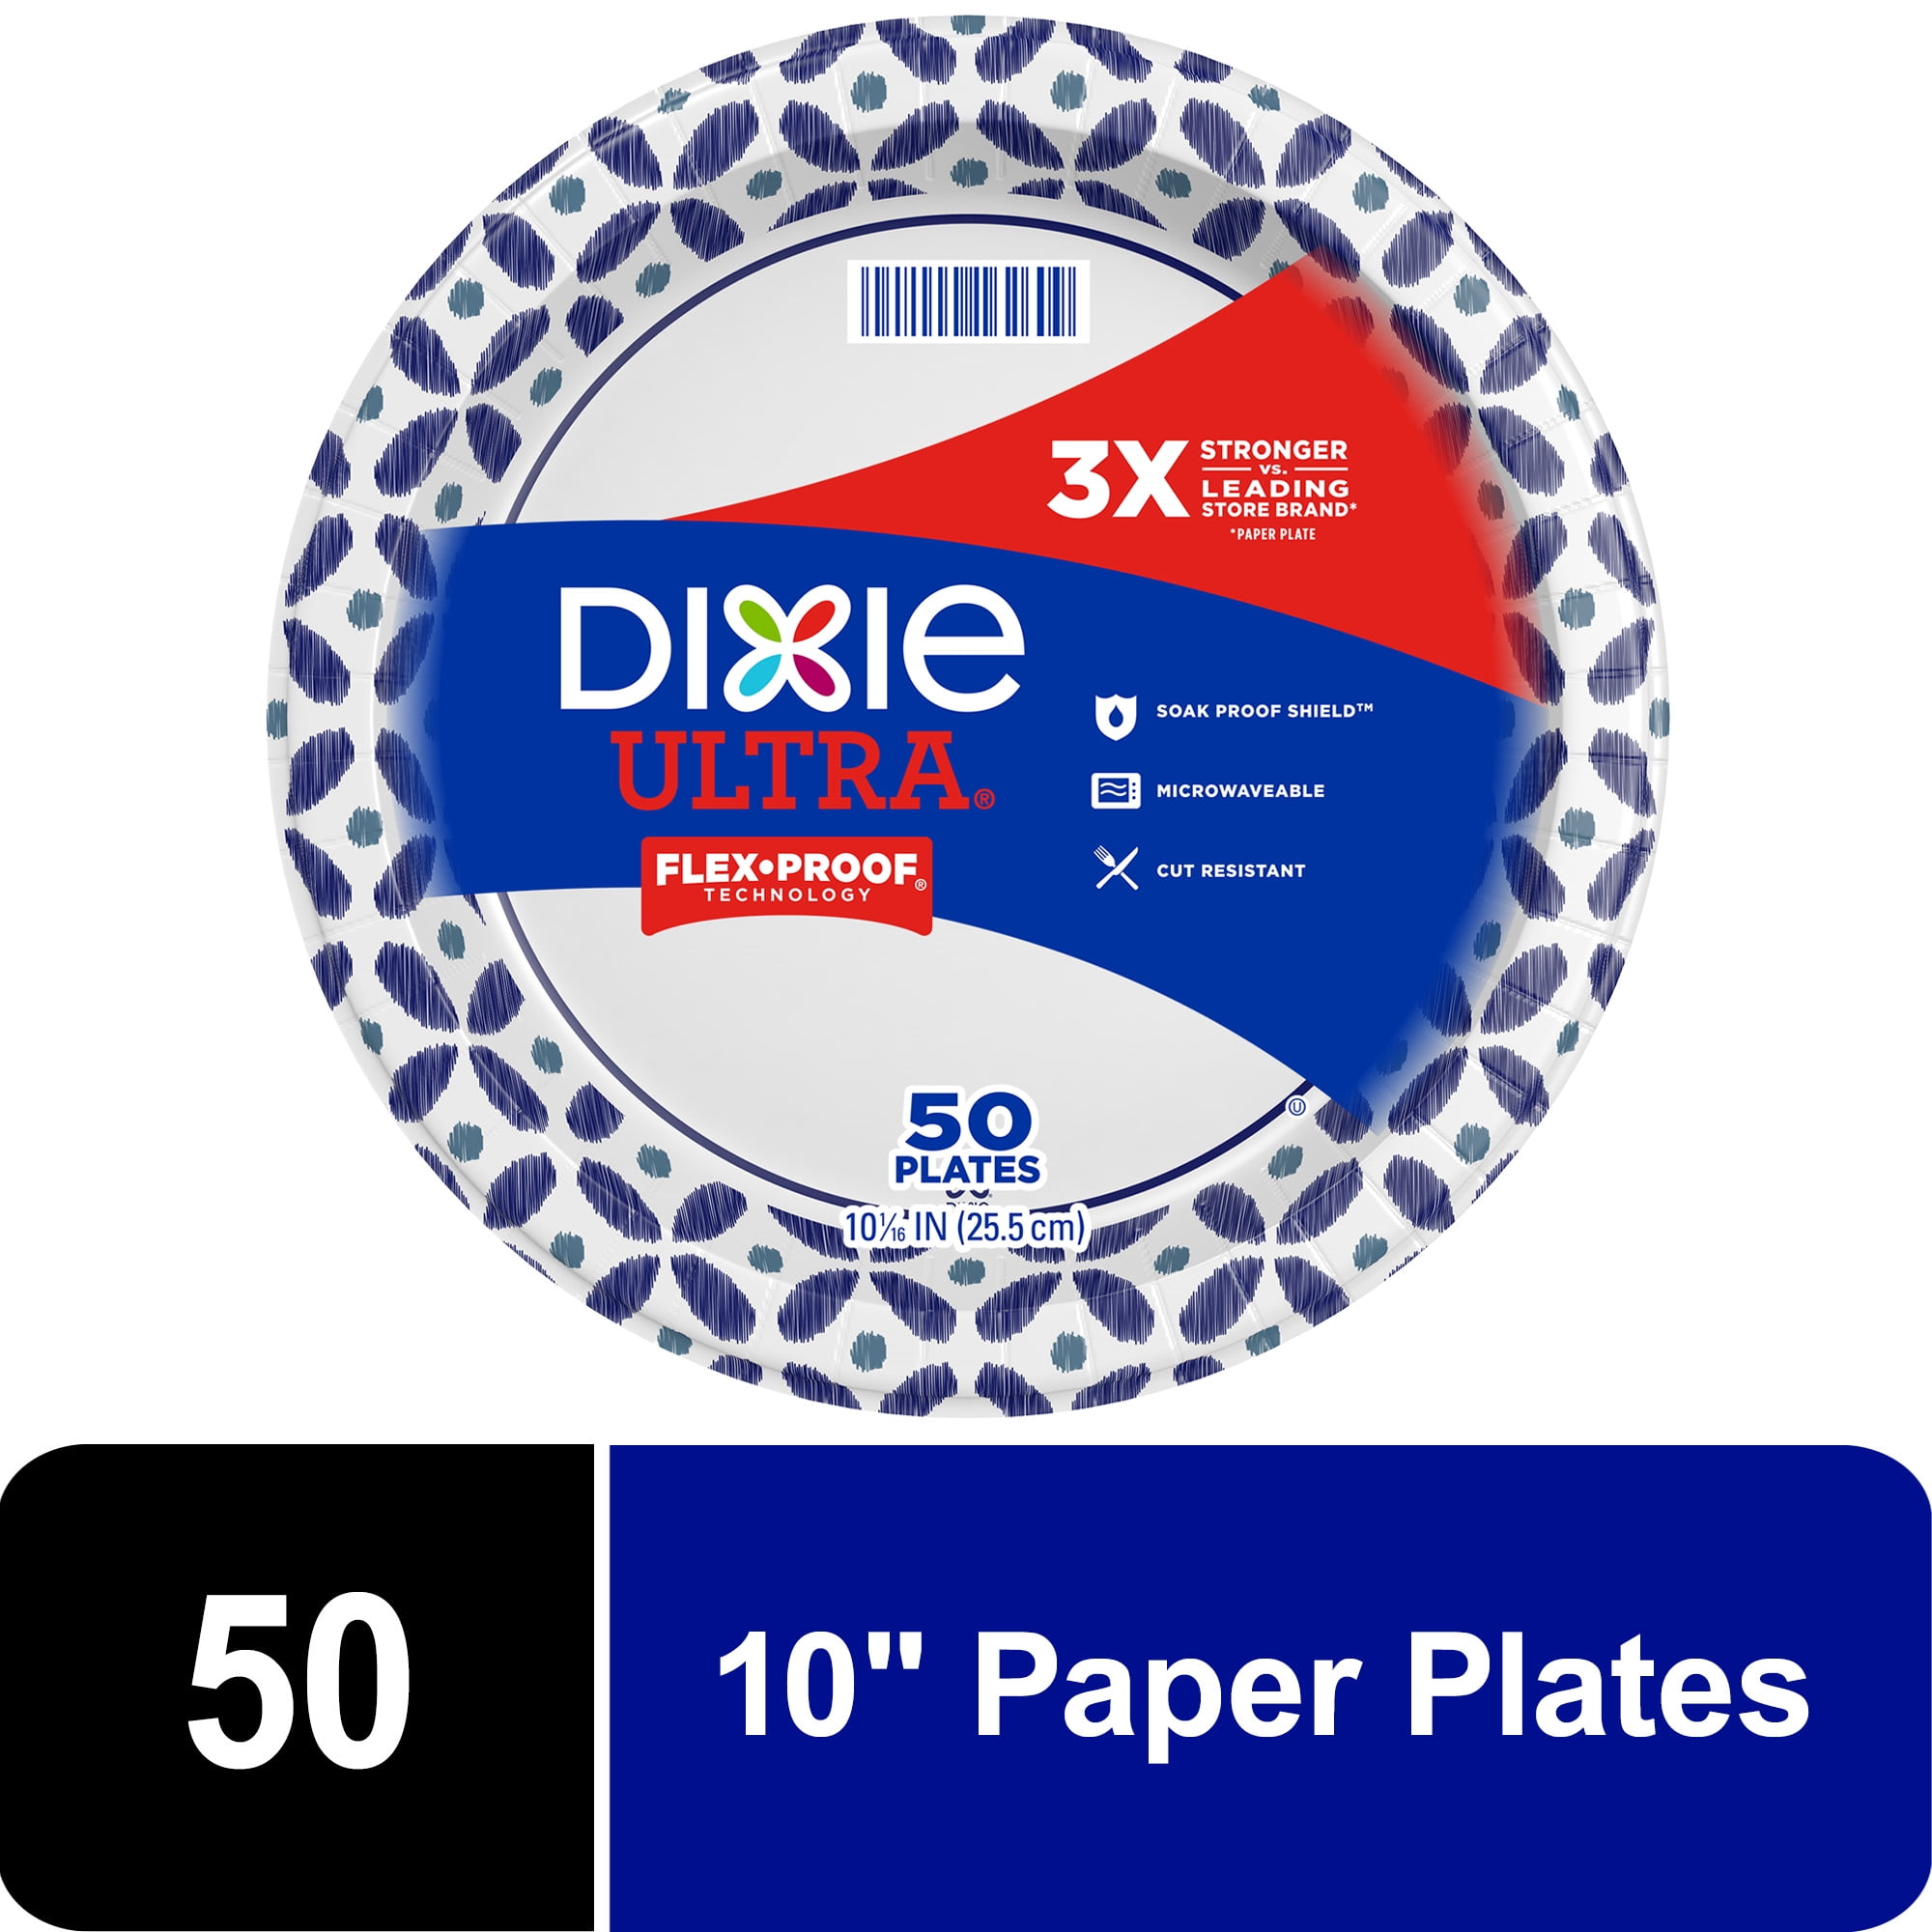 Natures Own Green Label Paper Plates, 9 Inch - 100 plates